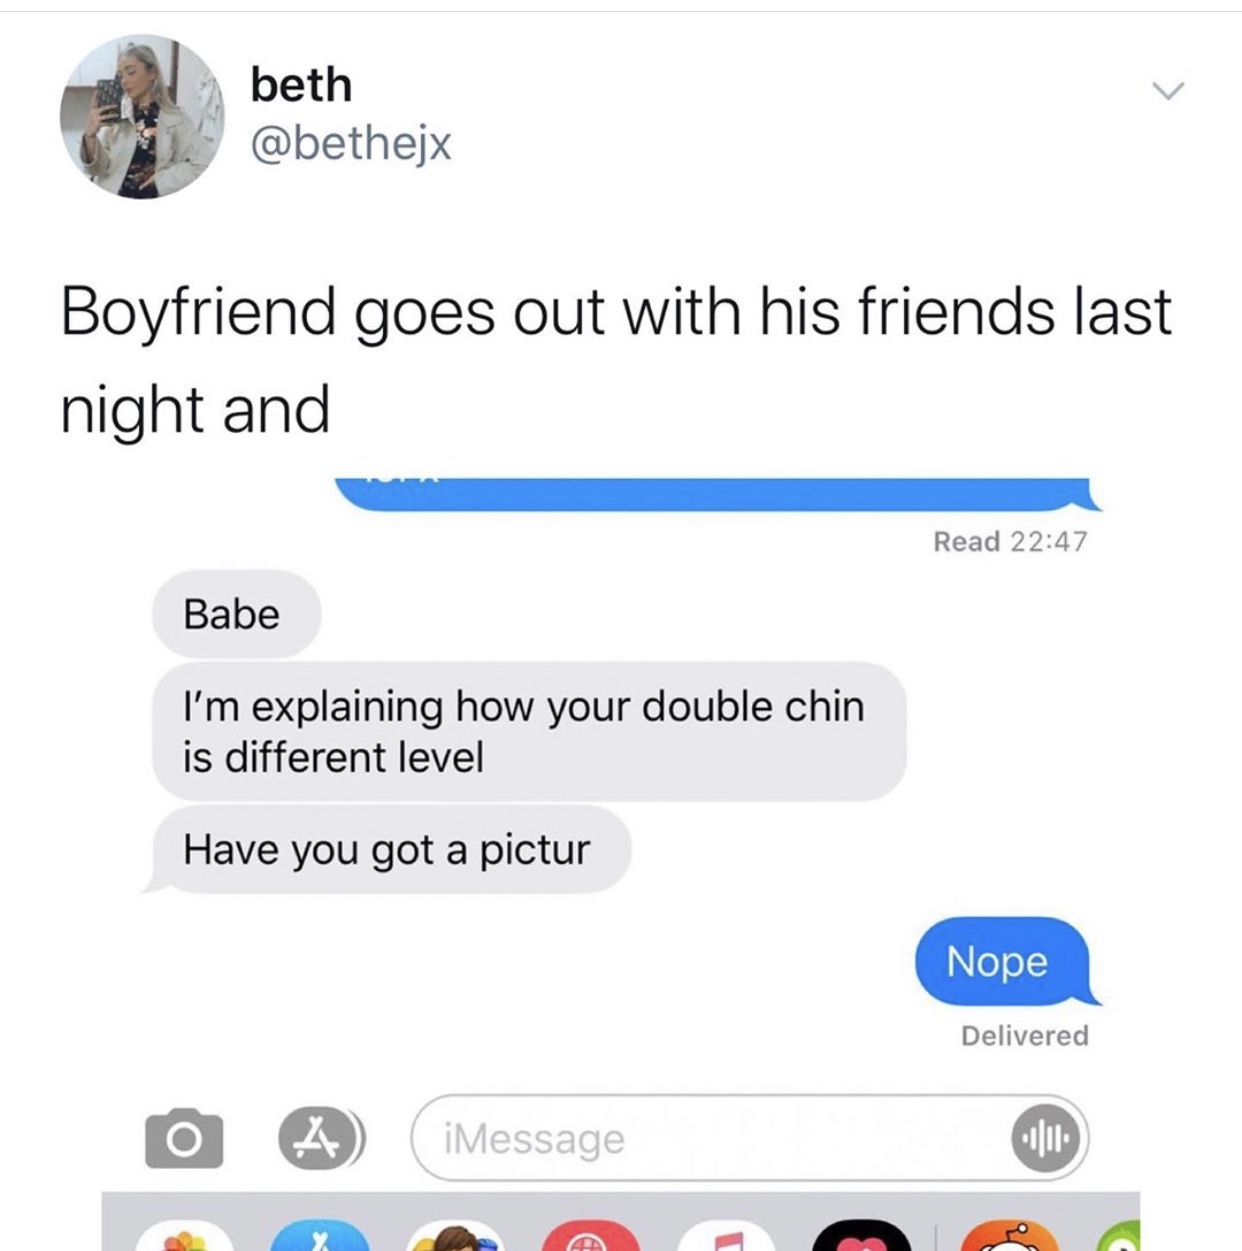 multimedia - beth Boyfriend goes out with his friends last night and Read Babe I'm explaining how your double chin is different level Have you got a pictur Nope Delivered iMessage